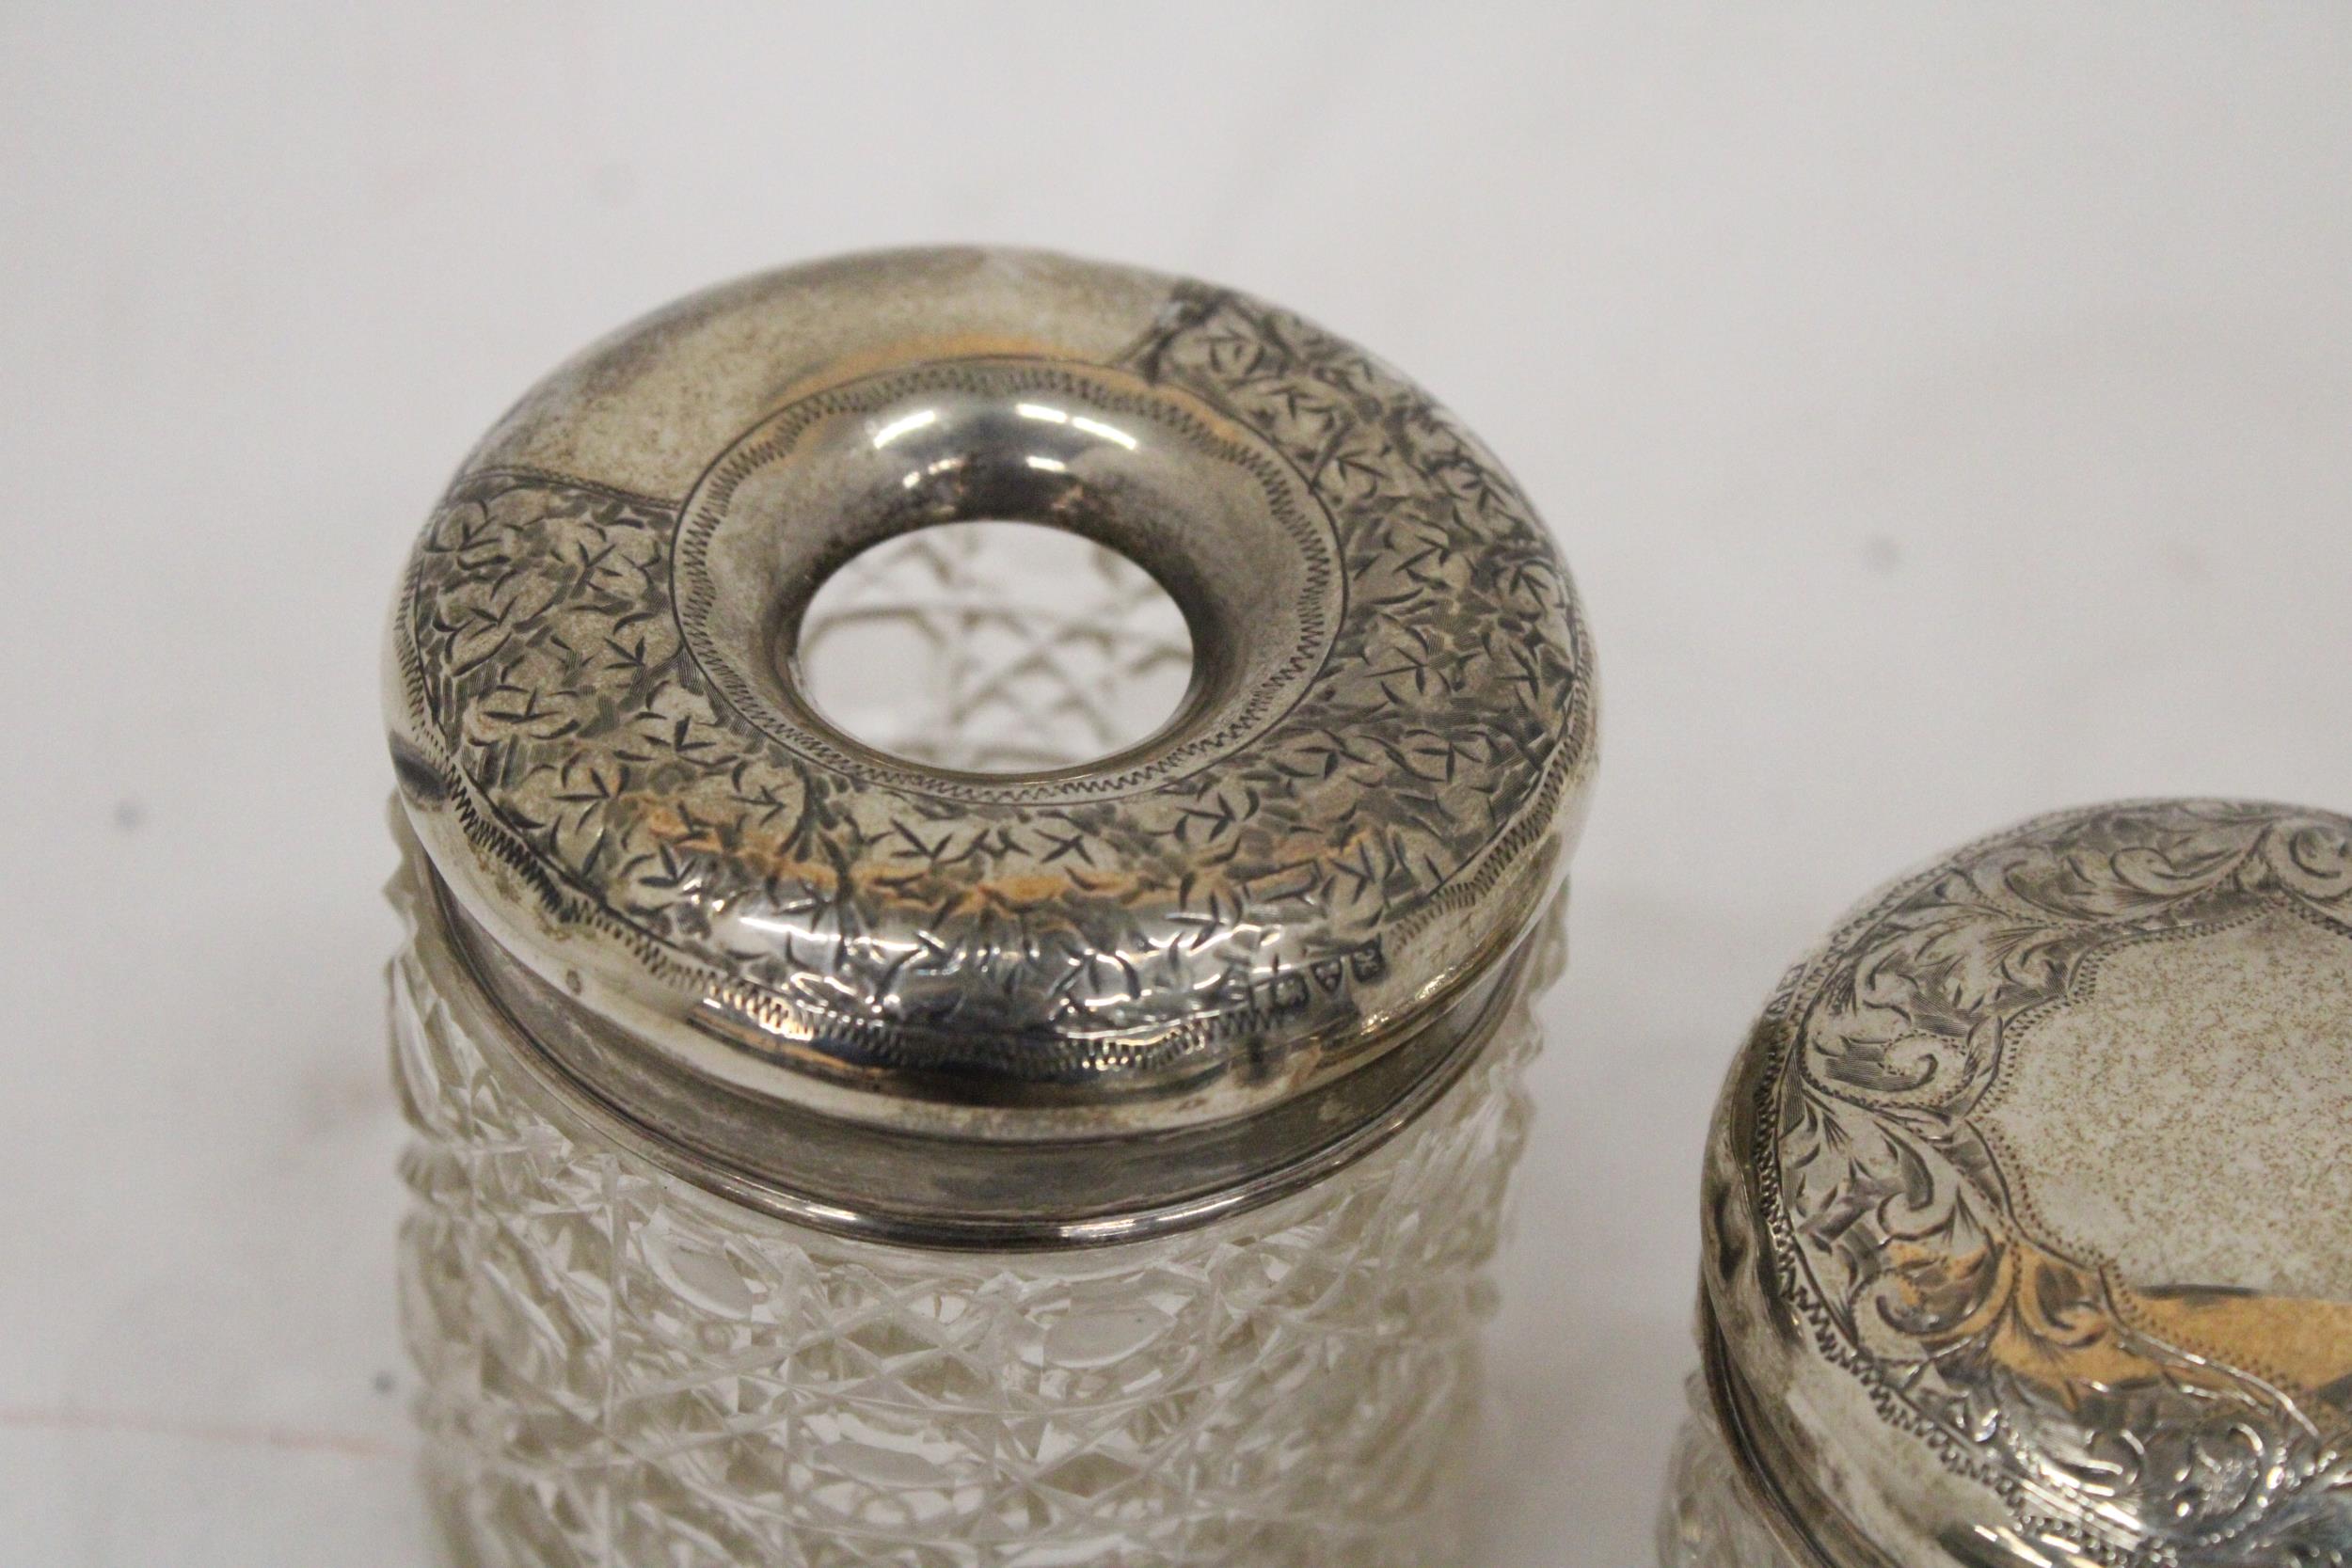 A STERLING SILVER TOP HAIR PIN JAR TOGETHER WITH A SILVER TOPPED COCKTAIL STICK HOLDER - Image 4 of 6